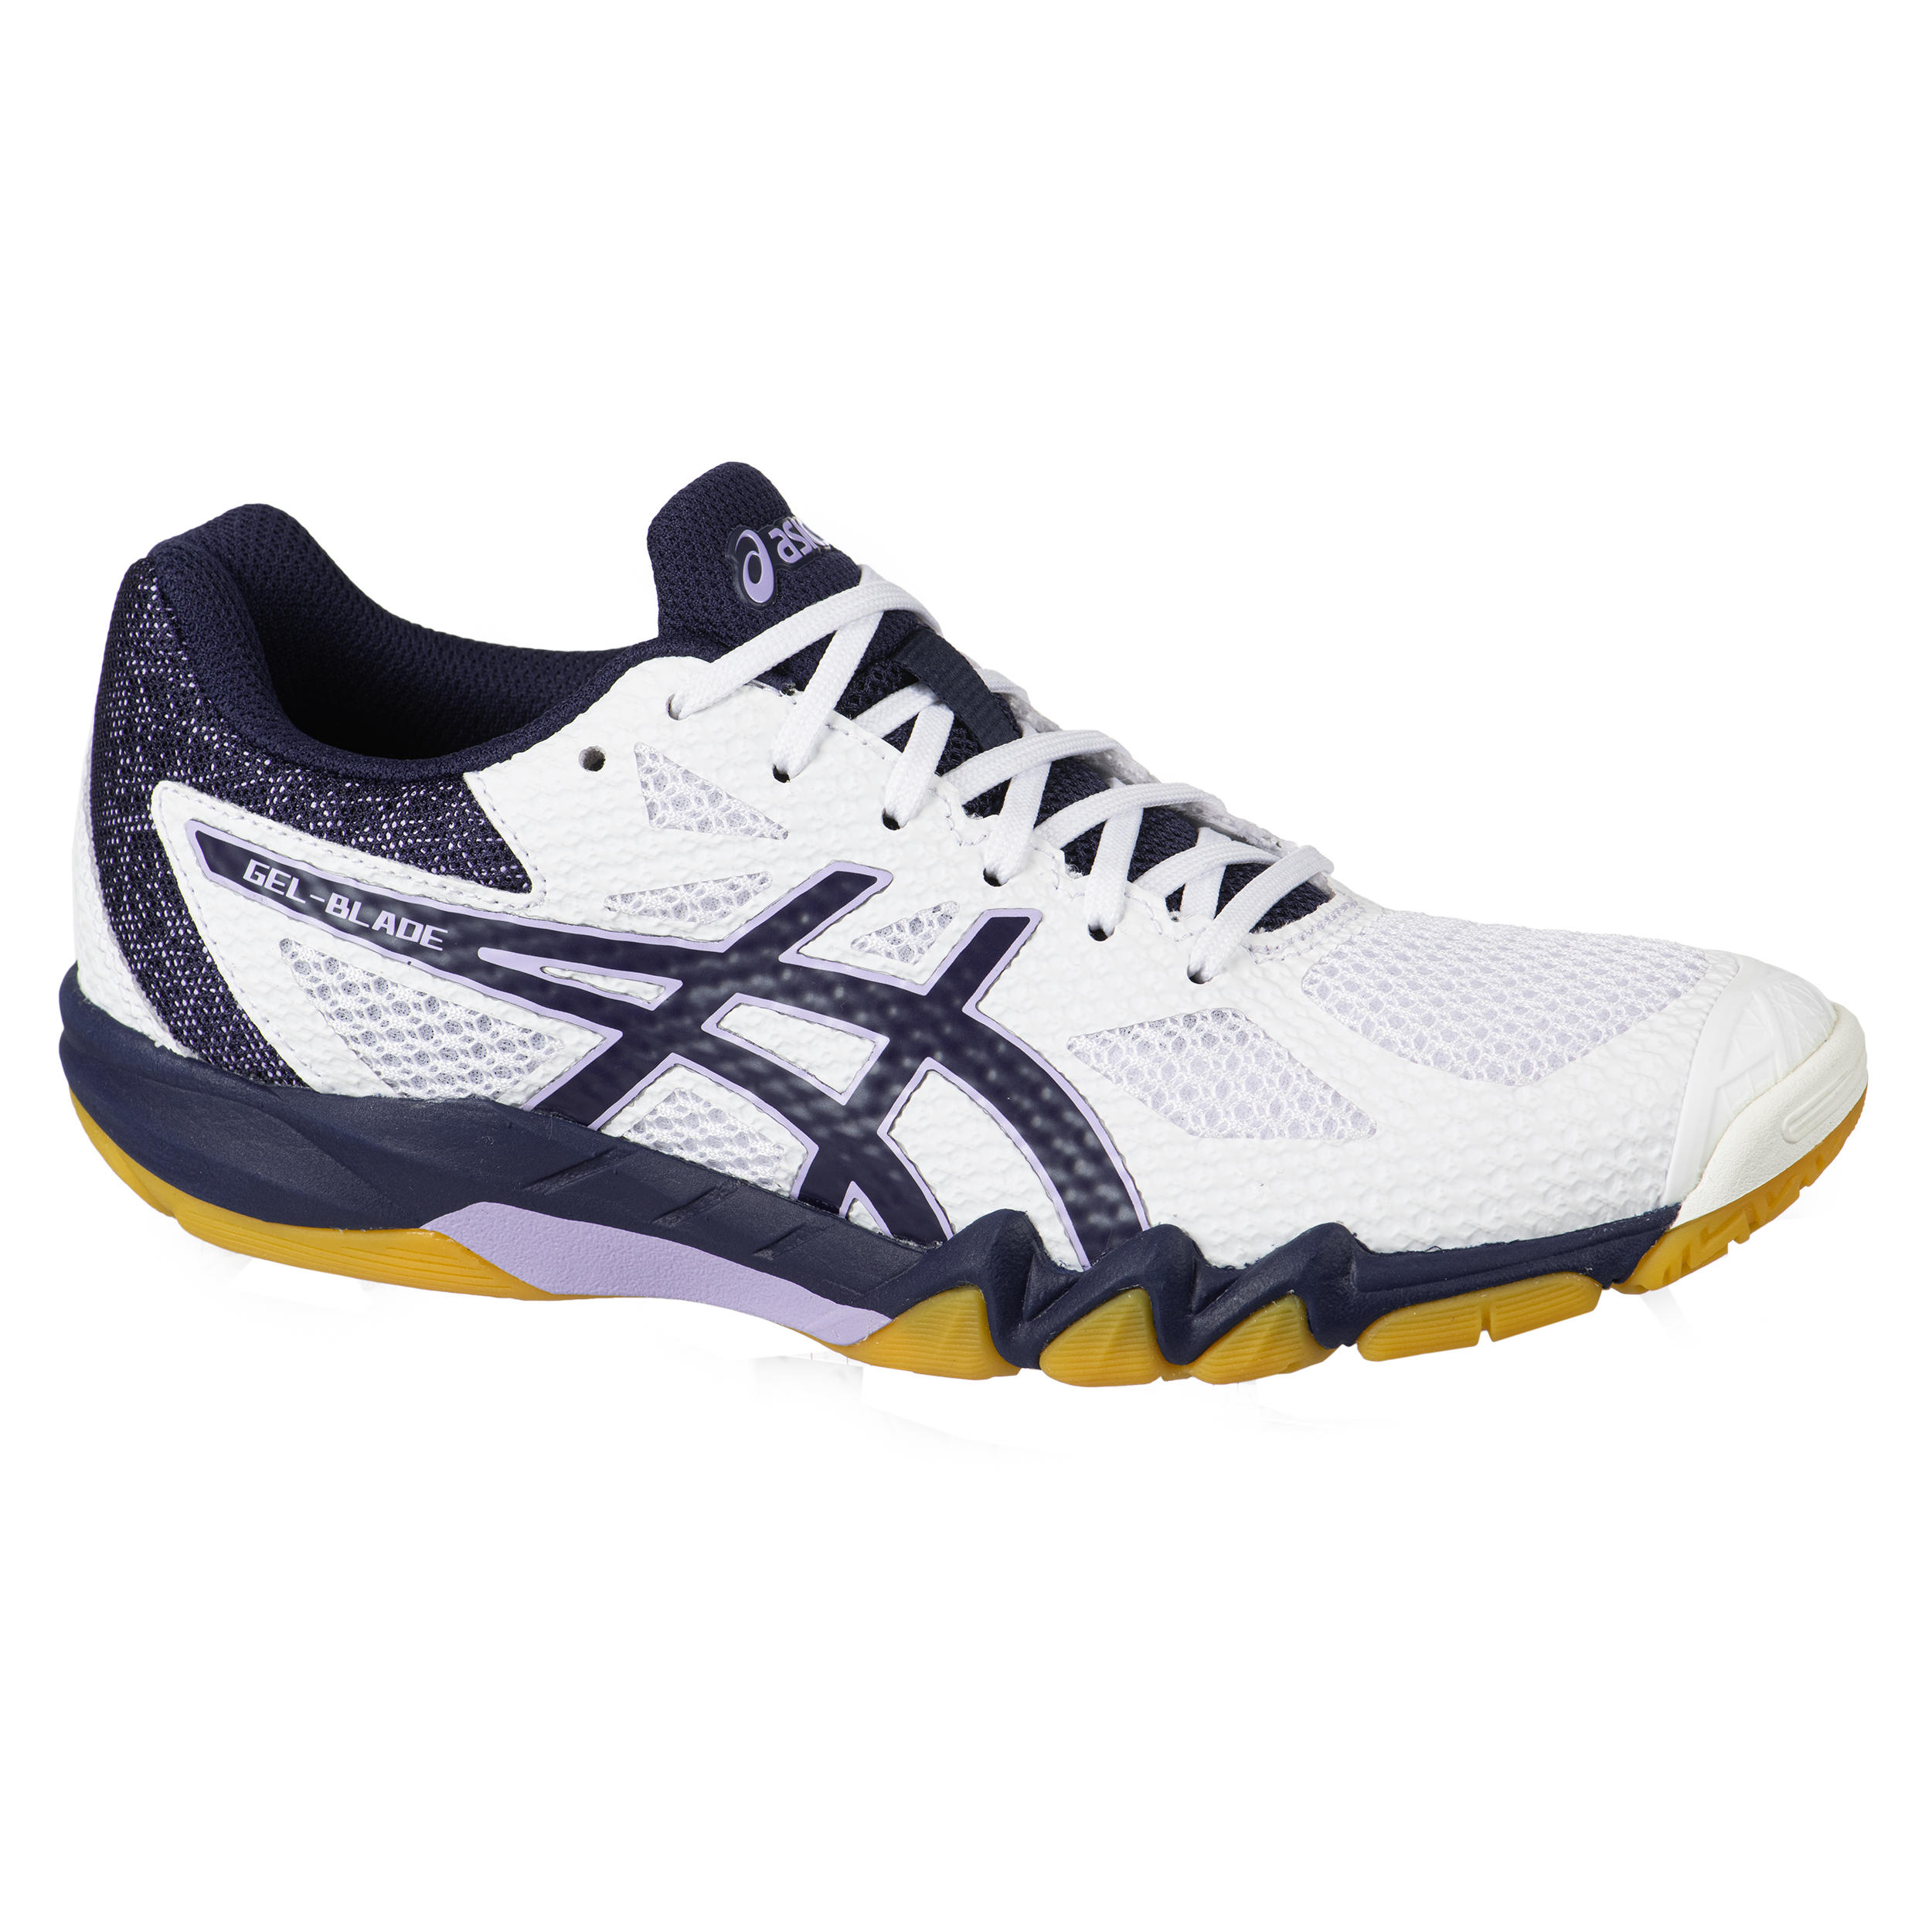 Badminton and Indoor Sports Shoes Gel Blade 7 - White/Navy 1/6